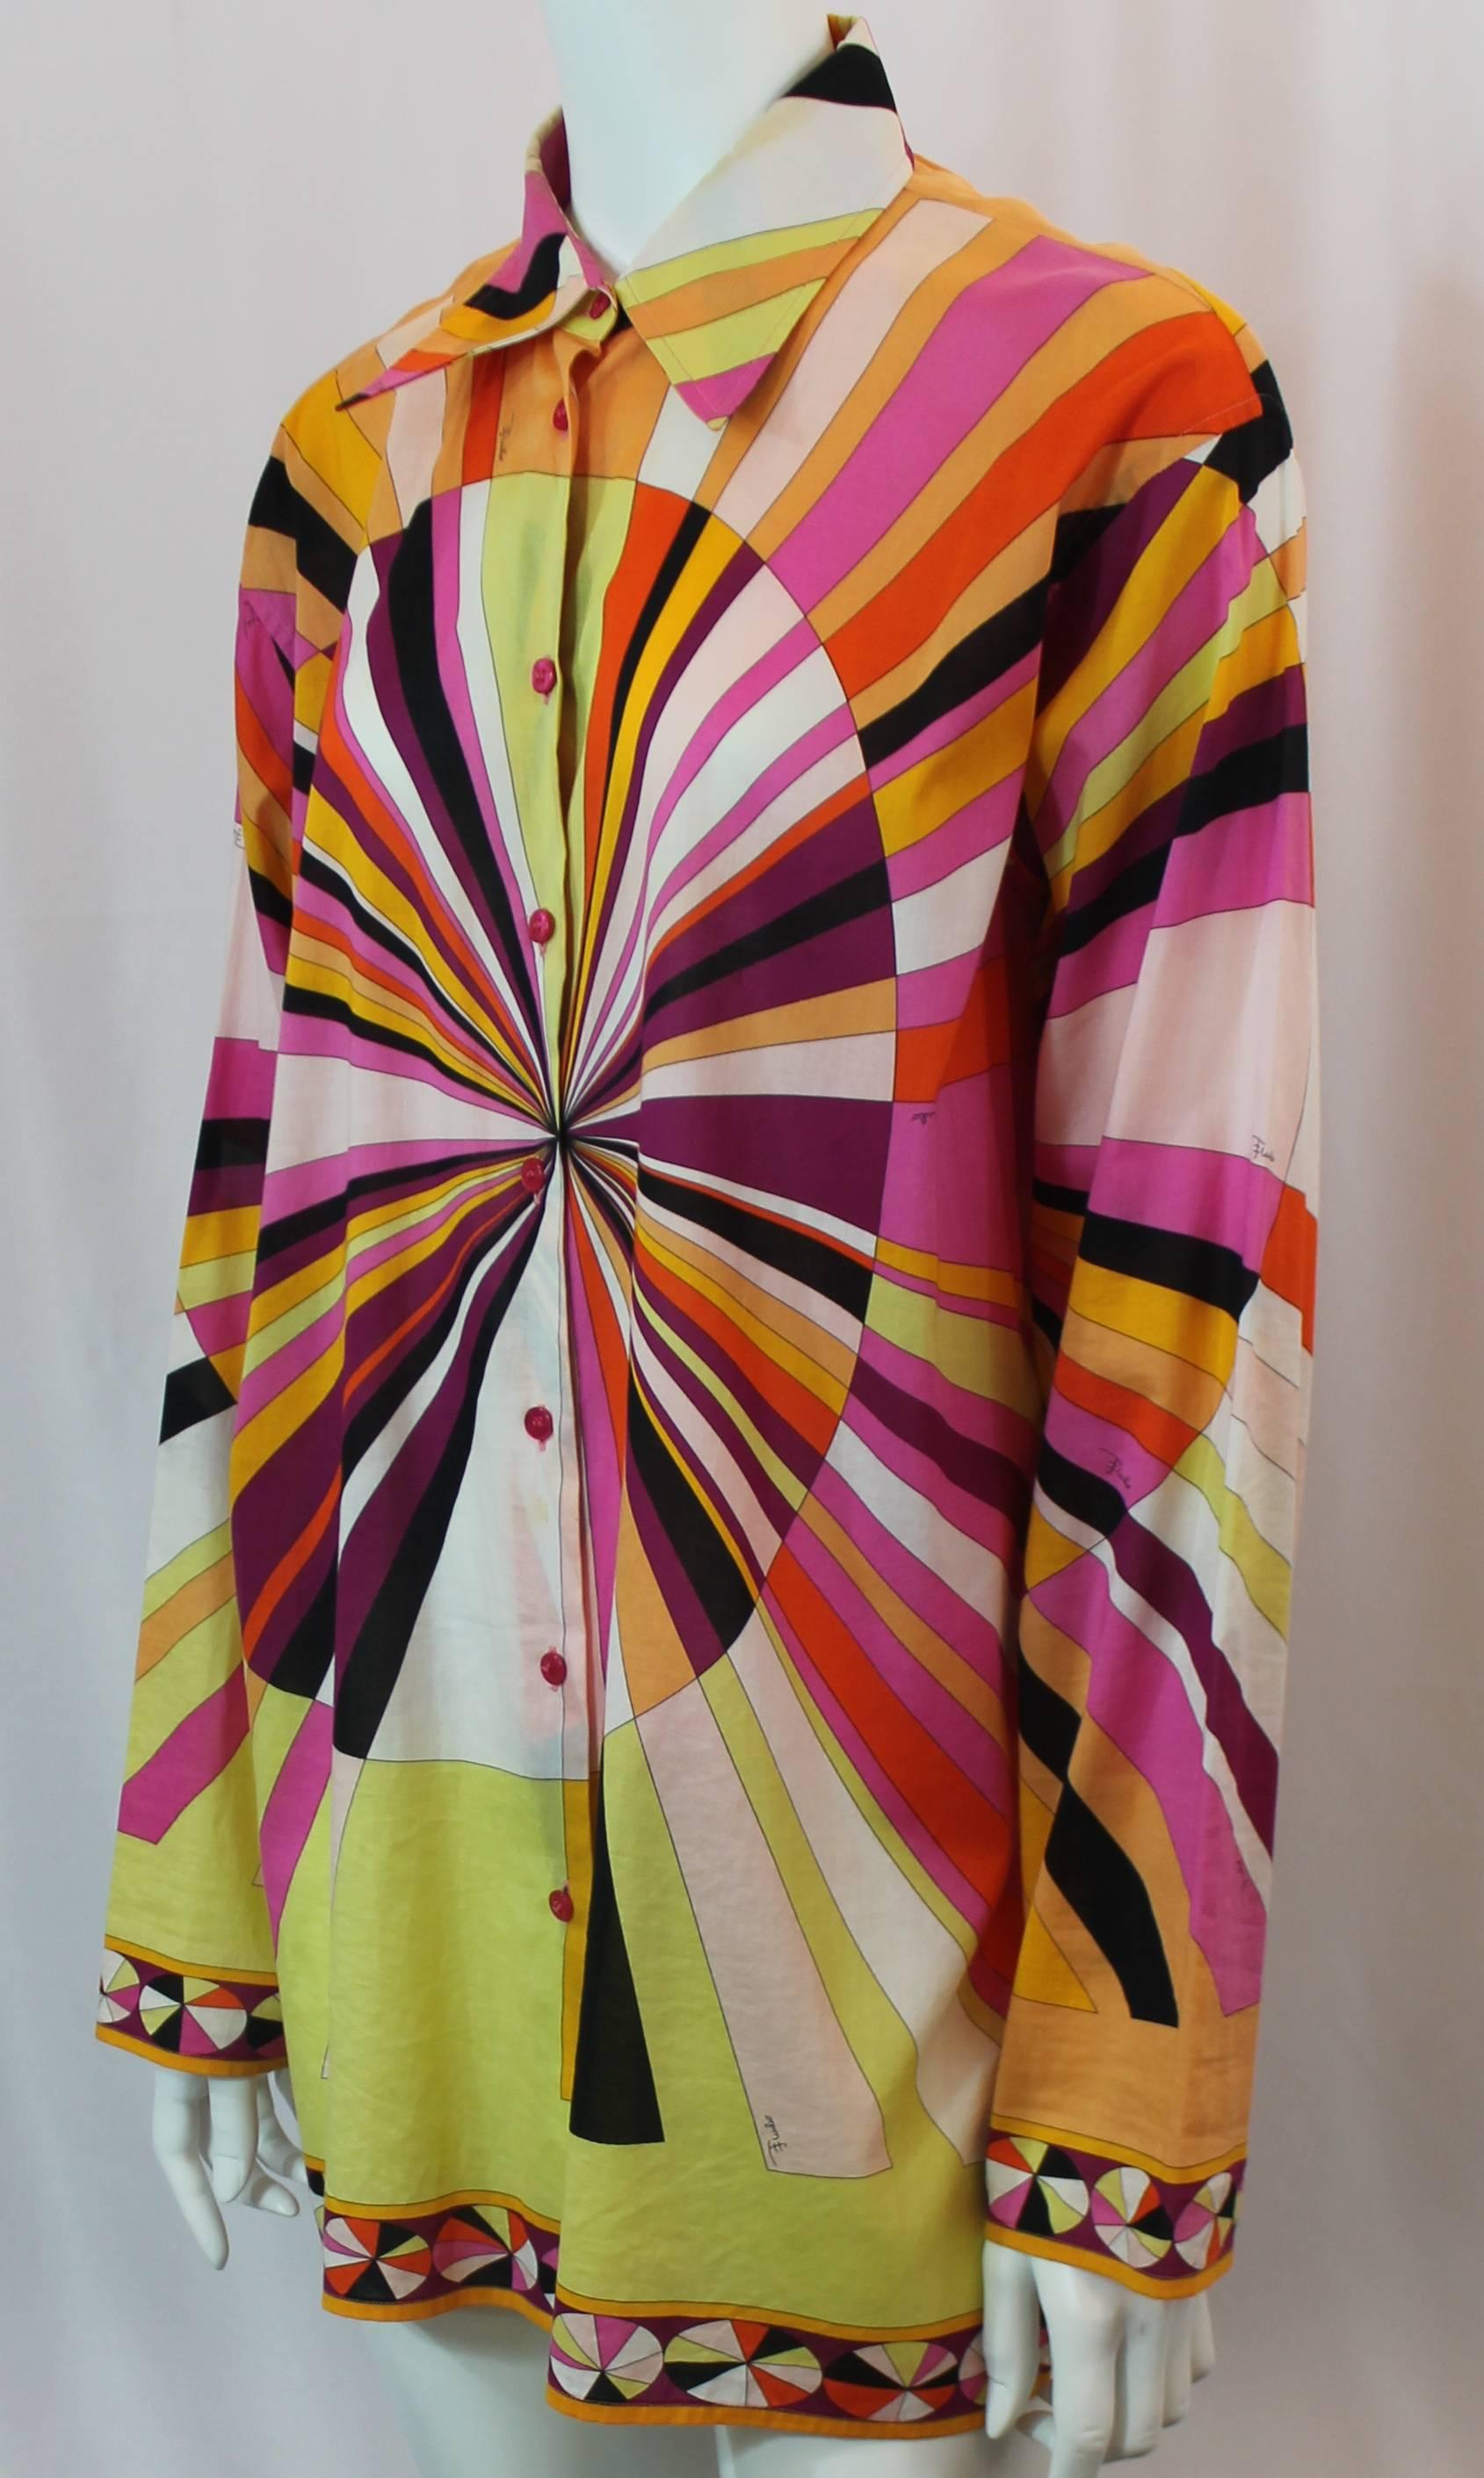 Emilio Pucci Multi-Colored Geometric Print Long Sleeve Button Down Shirt - M. This fun button down has orange, pink, golden, and yellow geometric pattern. There is a collar and pink buttons. This shirt is in fair condition due to small stains and